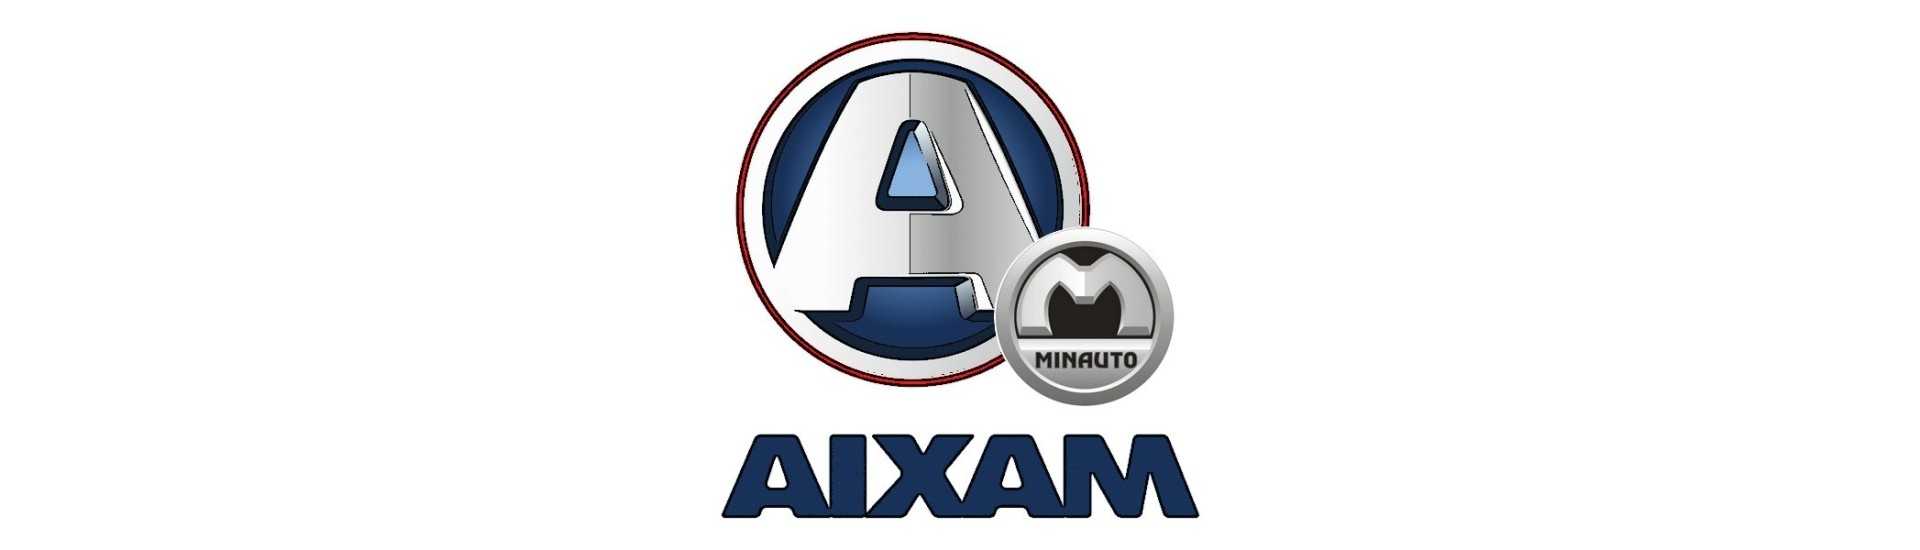 Fuel gauge at the best car price without a permit Aixam Minauto